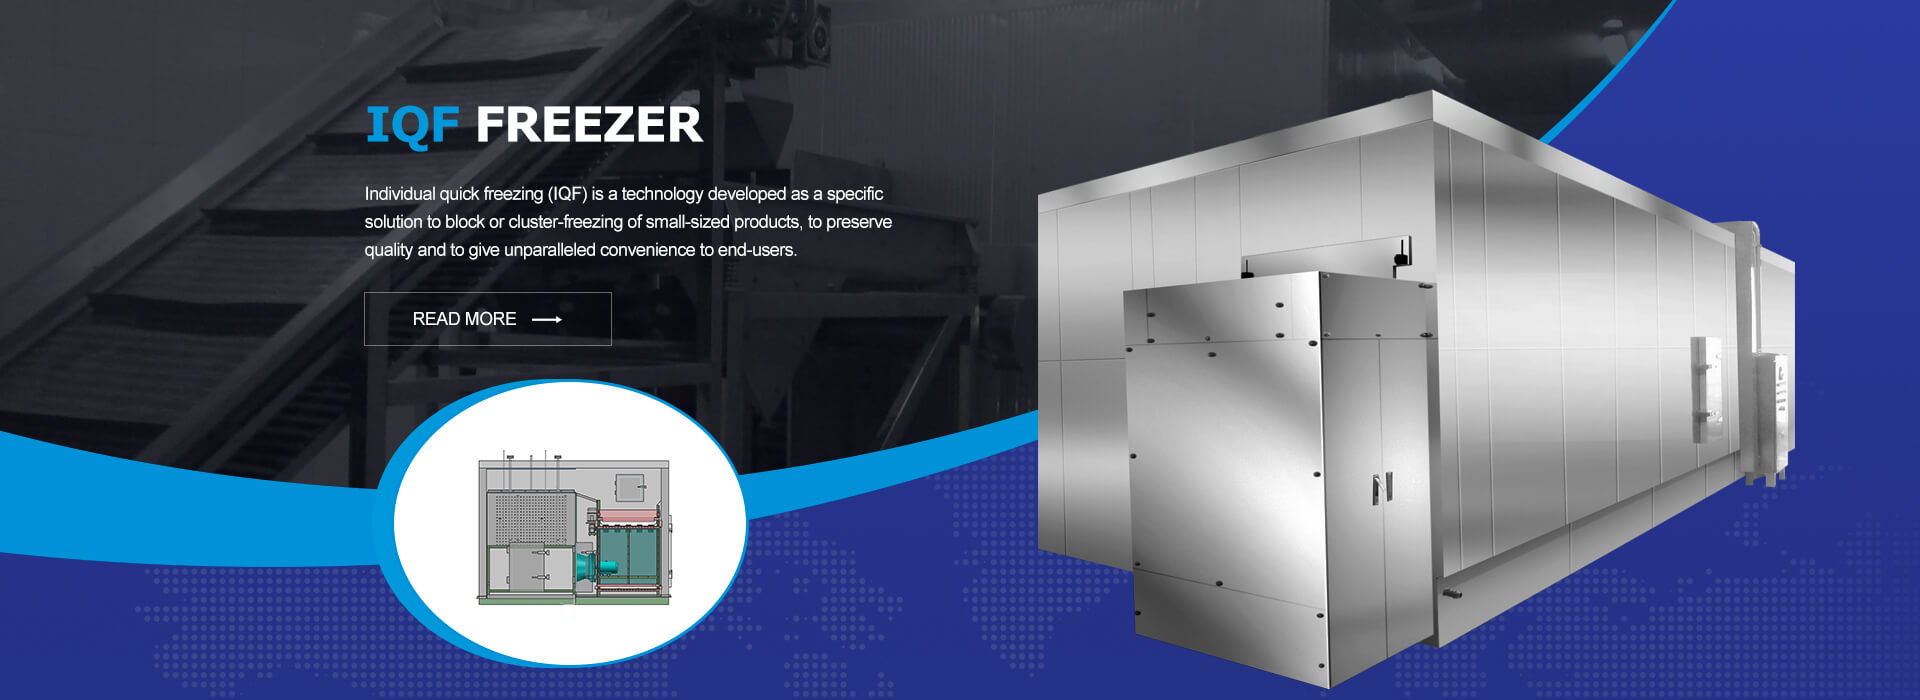 Individual quick freezing (IQF) is a technology developed as a specific solution to block or cluster-freezing of small sized products